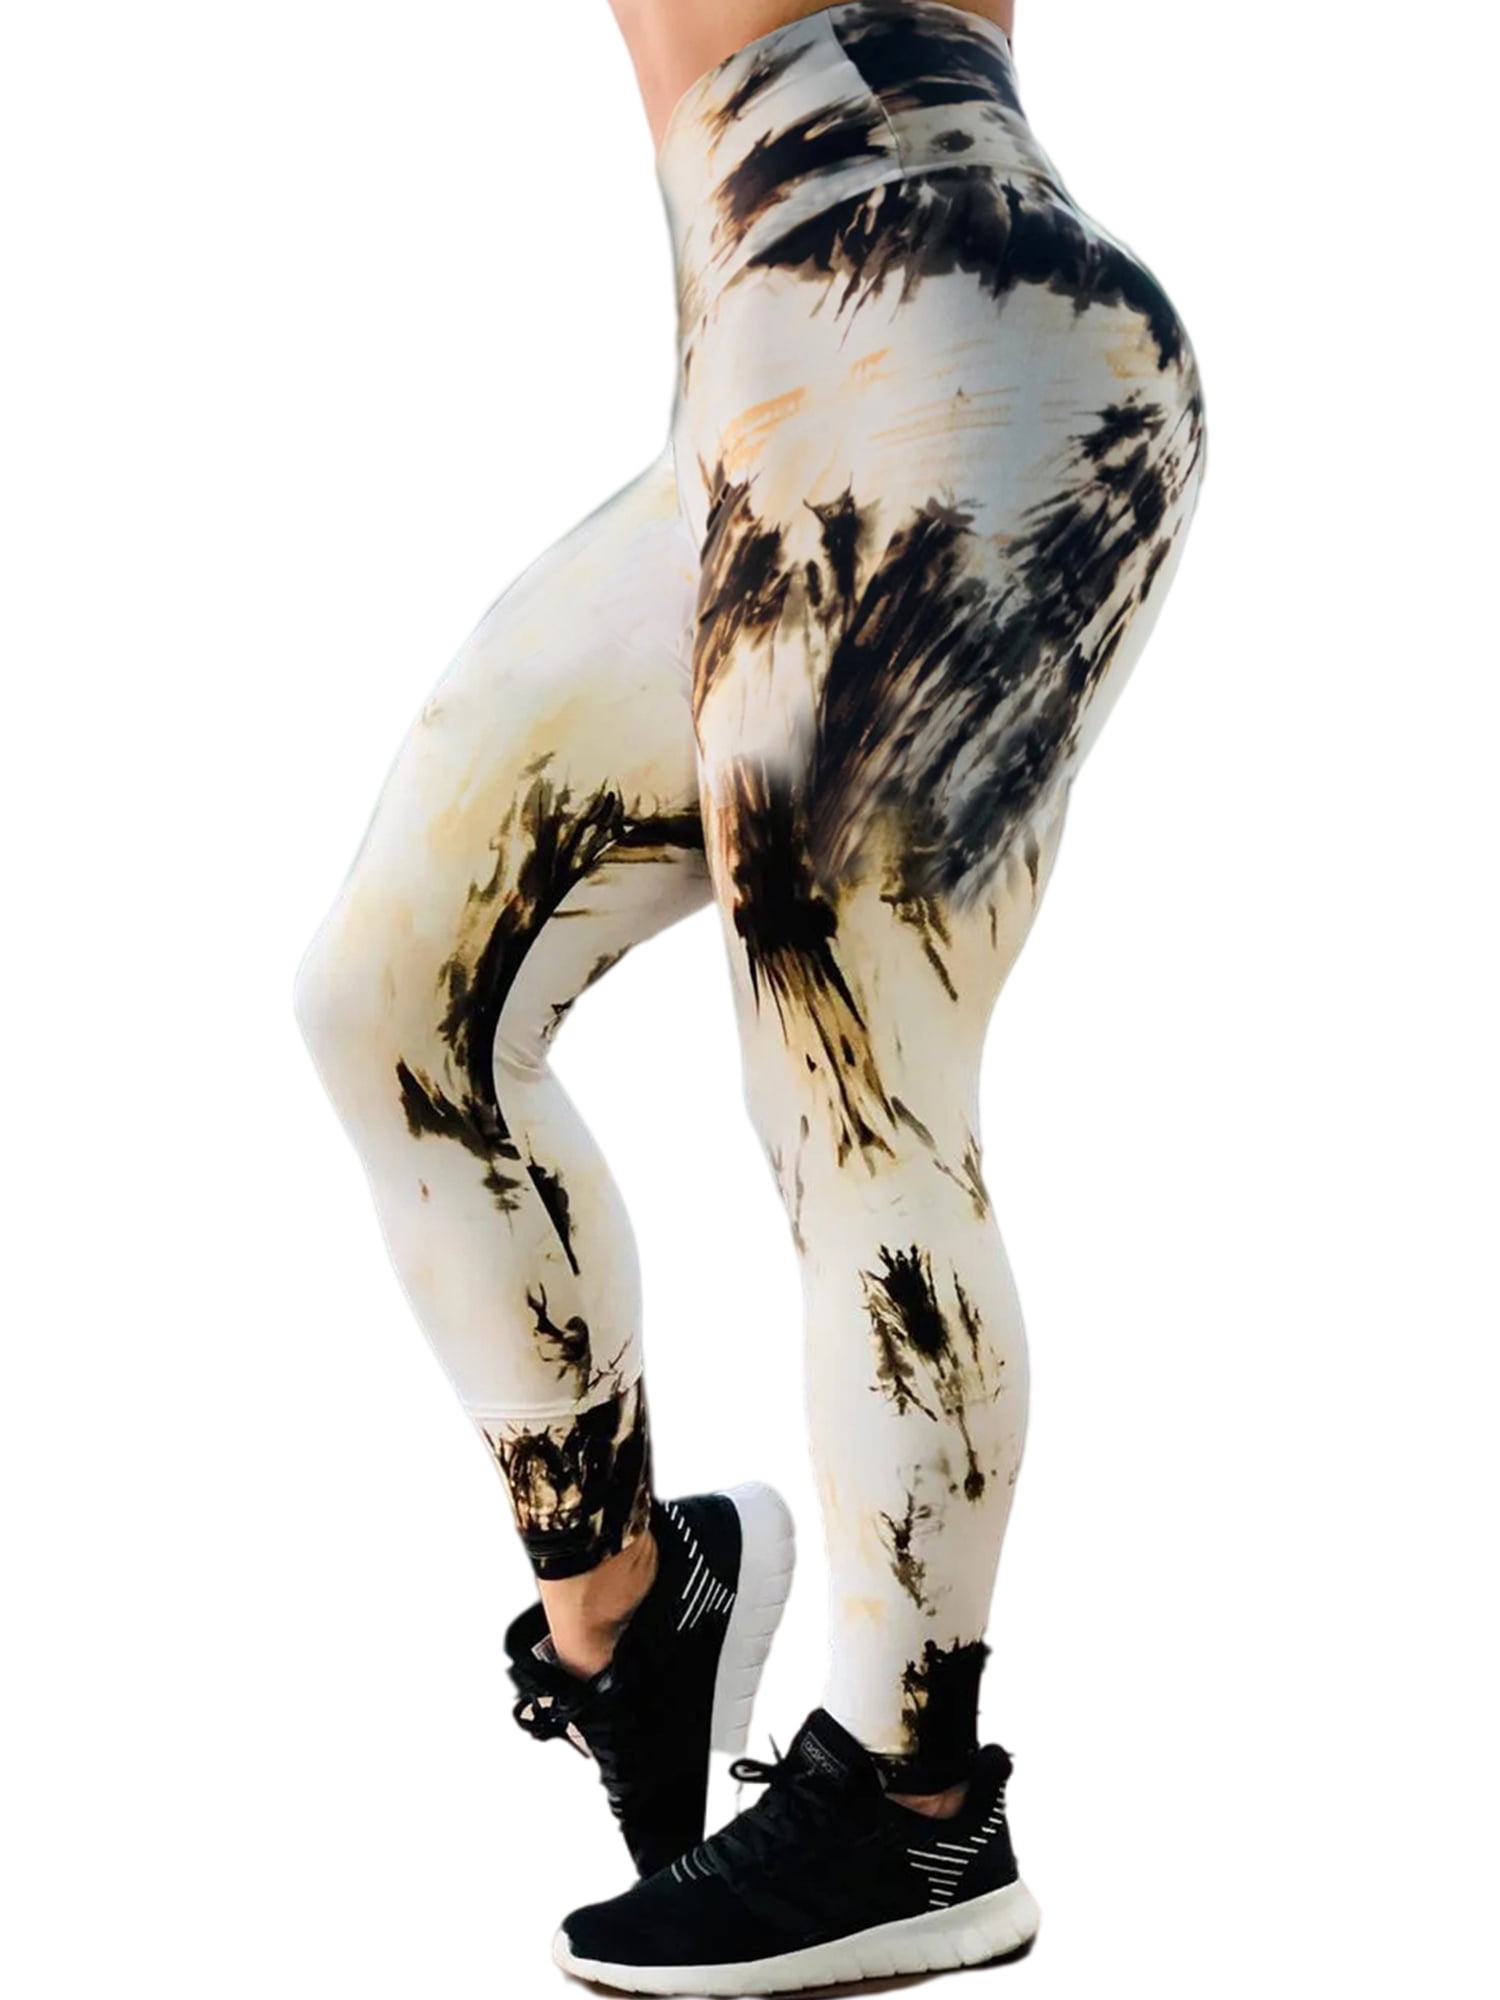 Details about   Women's Fashion Yoga Leggings Tight Stretch Trousers Printed Pants Medium 